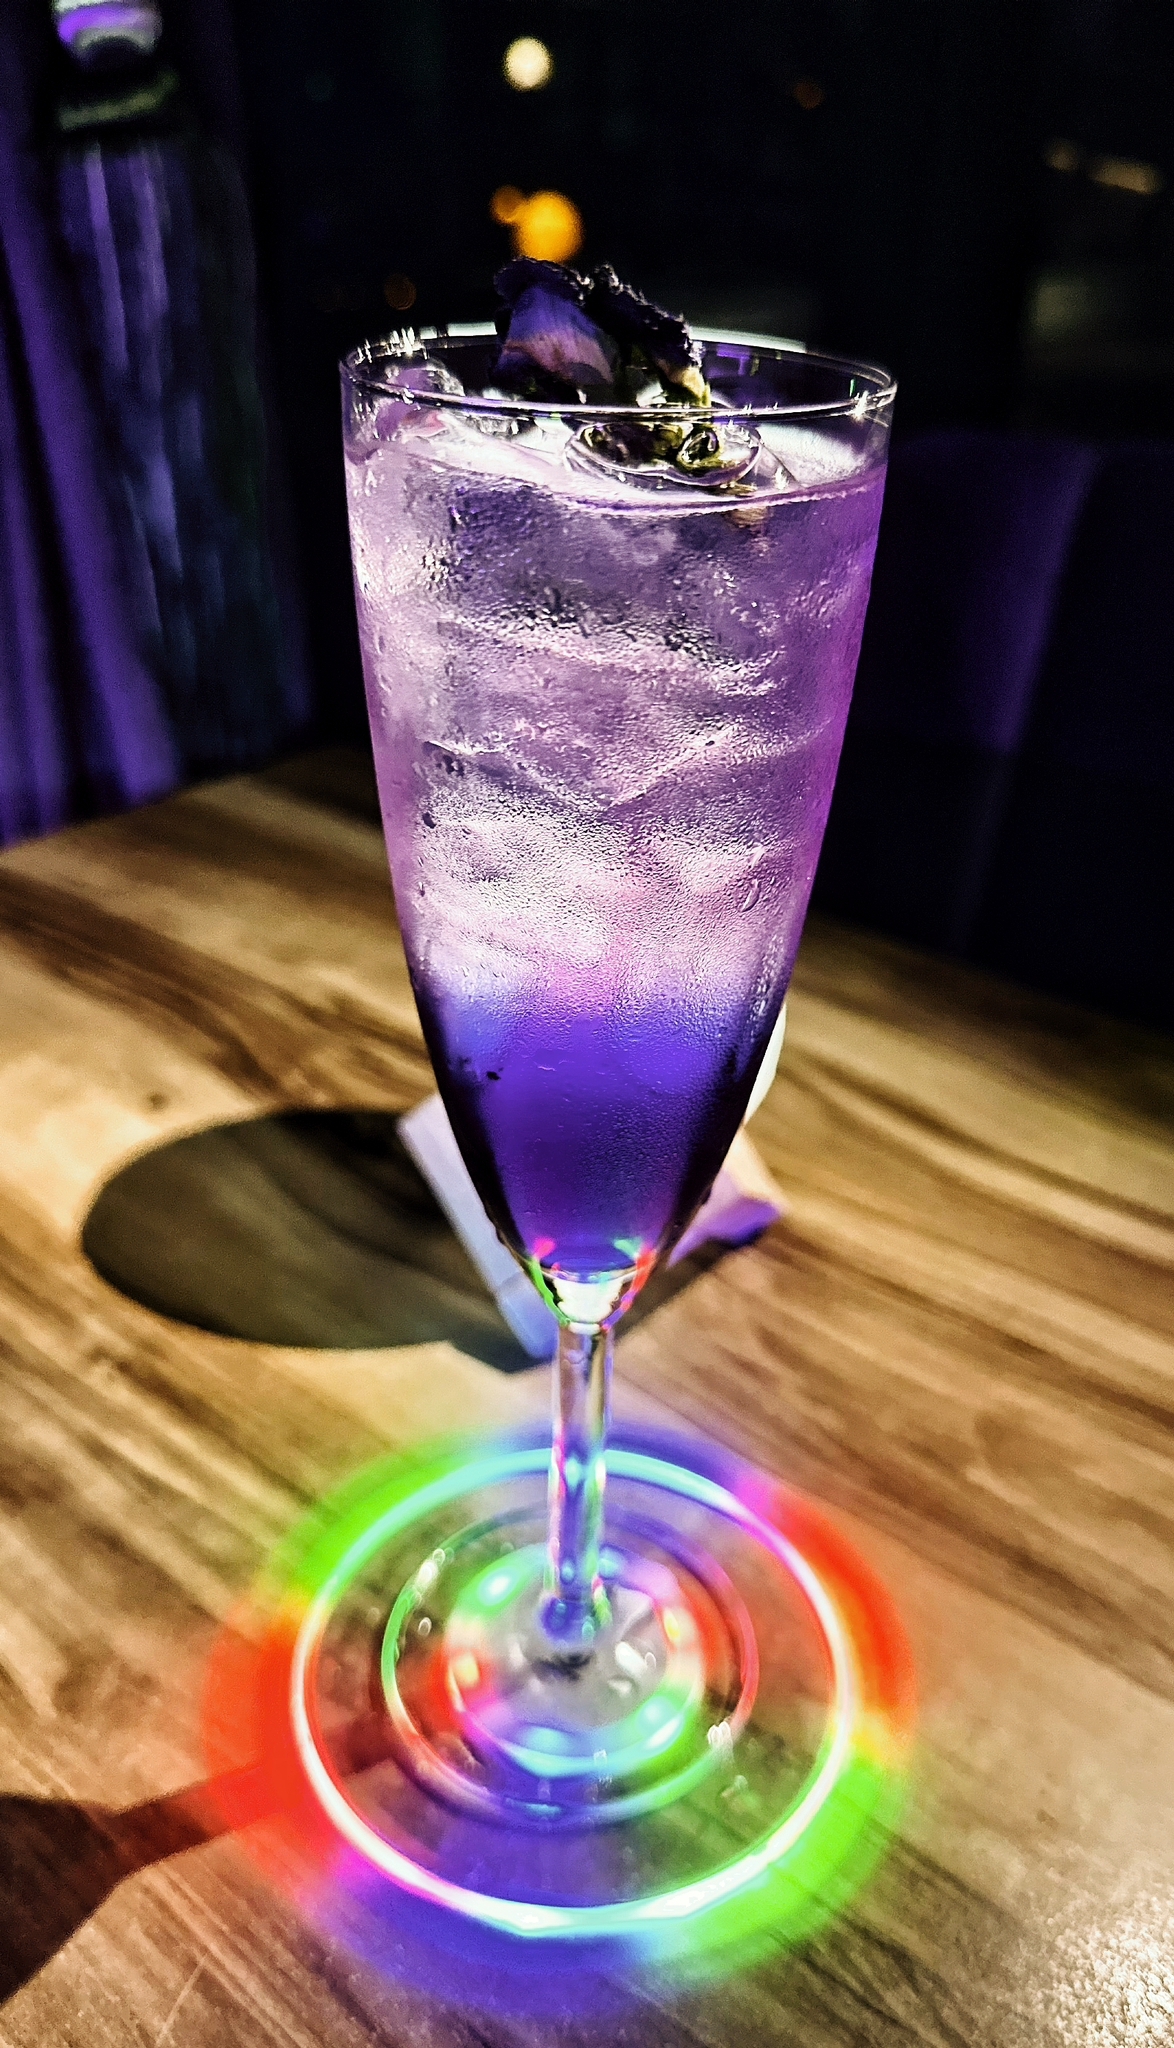 Singapore’s Moon Themed Rooftop Bar Drinks